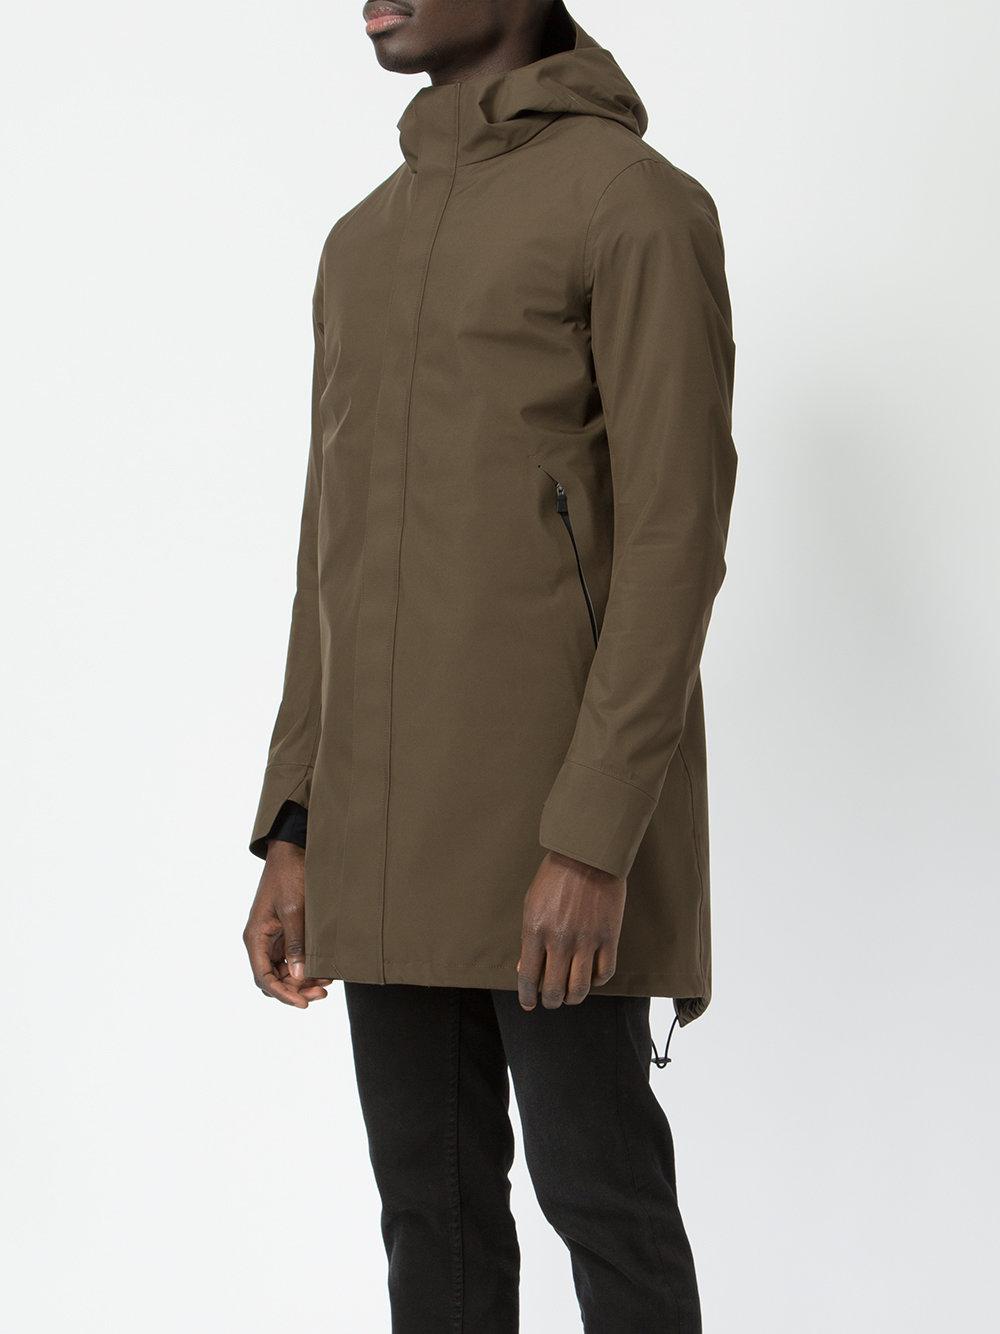 Herno Synthetic Hooded Parka in Green for Men - Lyst